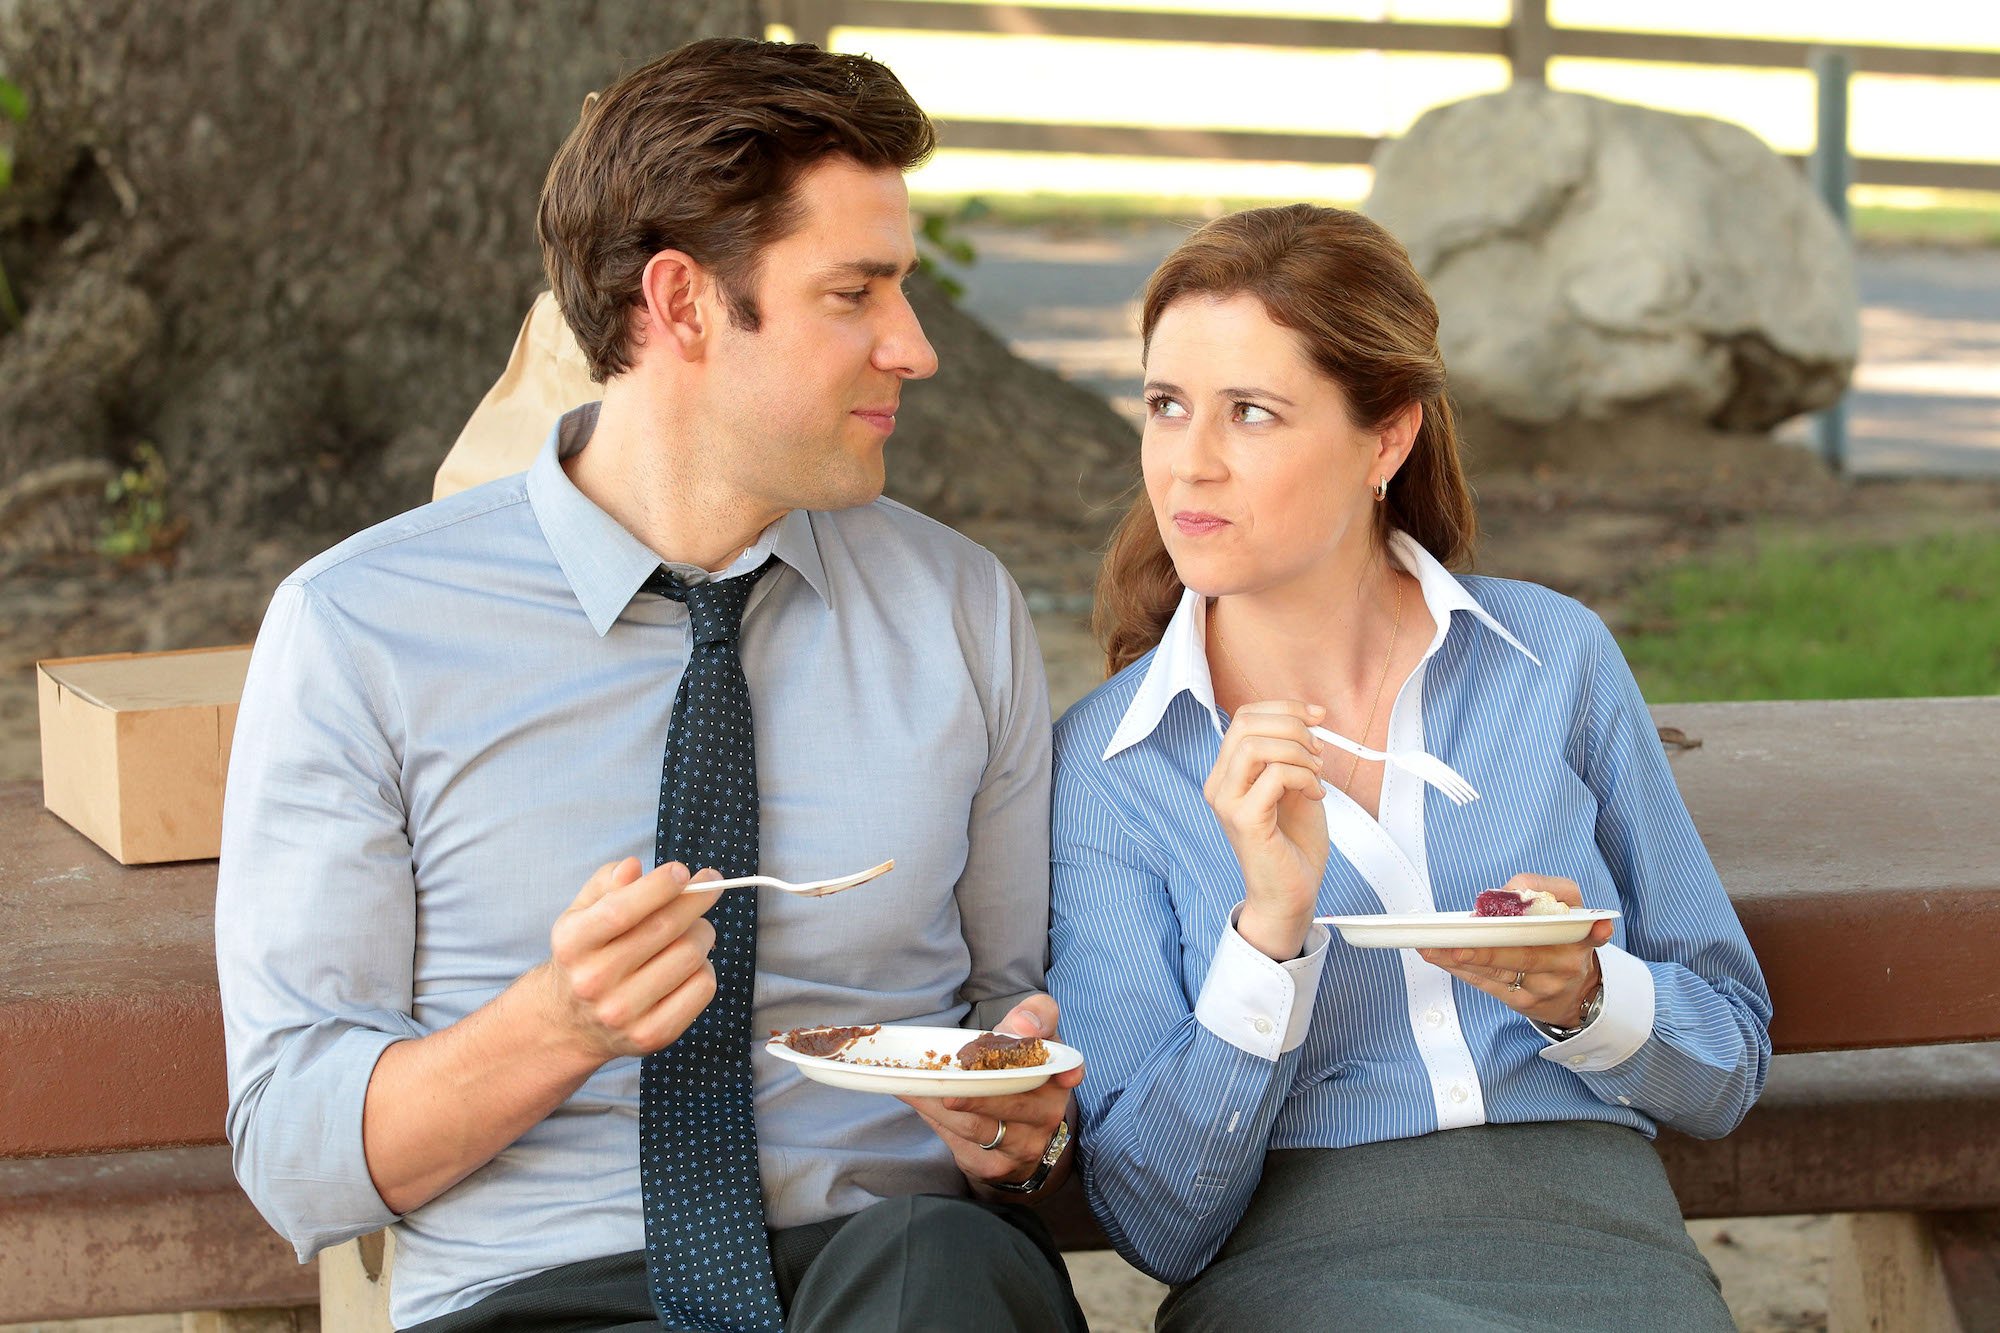 ‘The Office’: Jenna Fischer Objected to a Pam Scene That Included ‘Crass’ Dialogue